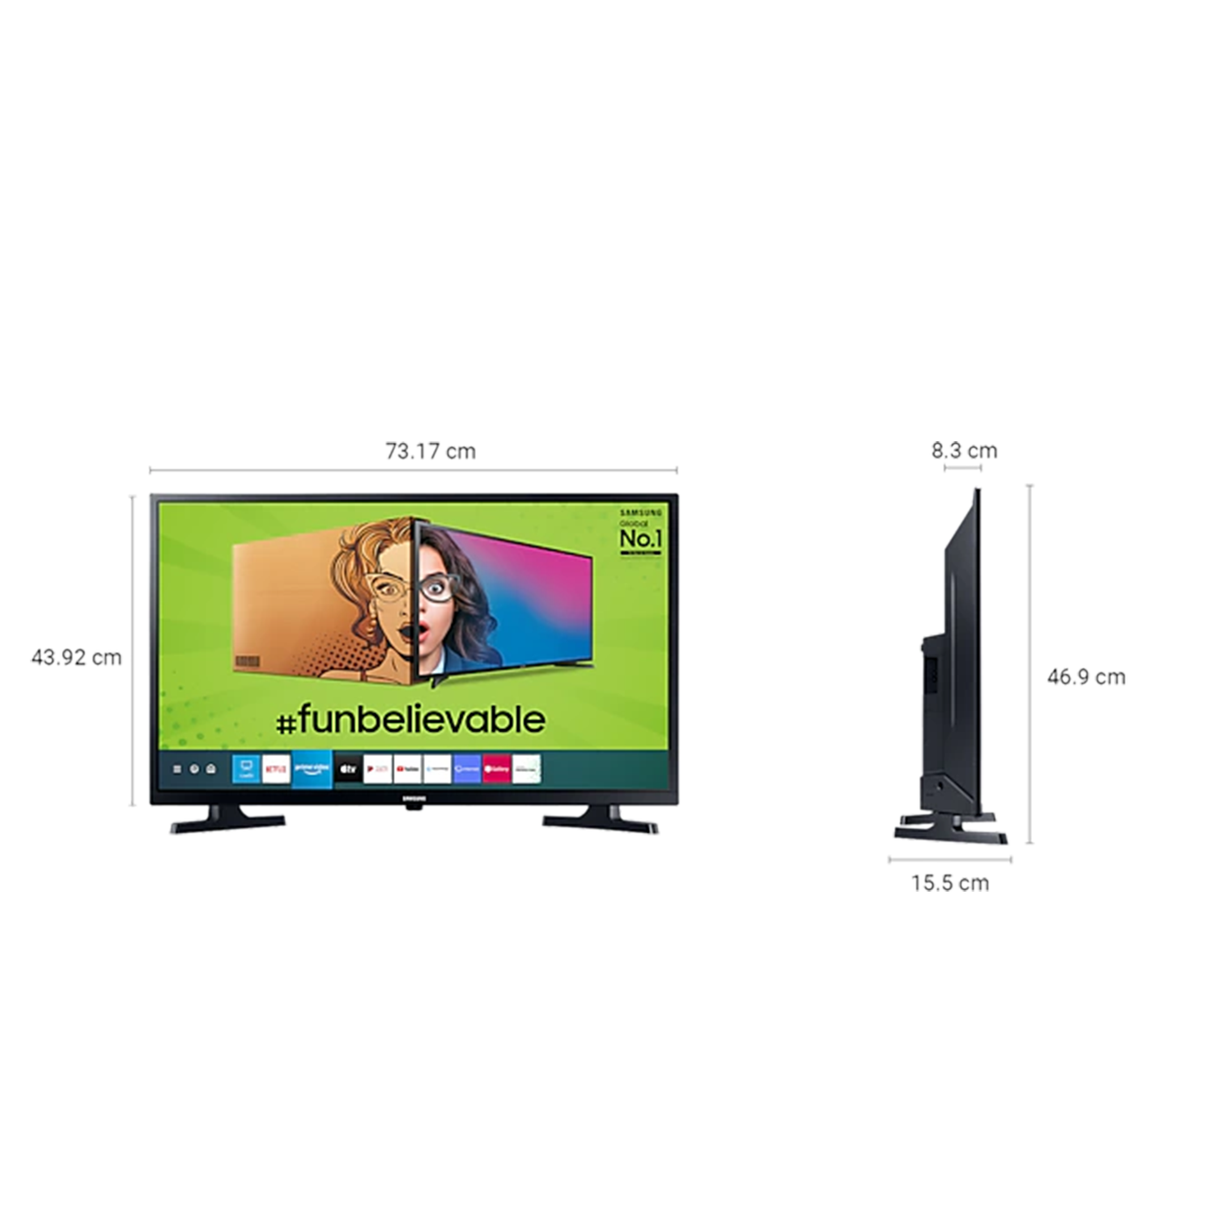 Samsung 32" HD Ready Android Smart TV - Glossy Black.